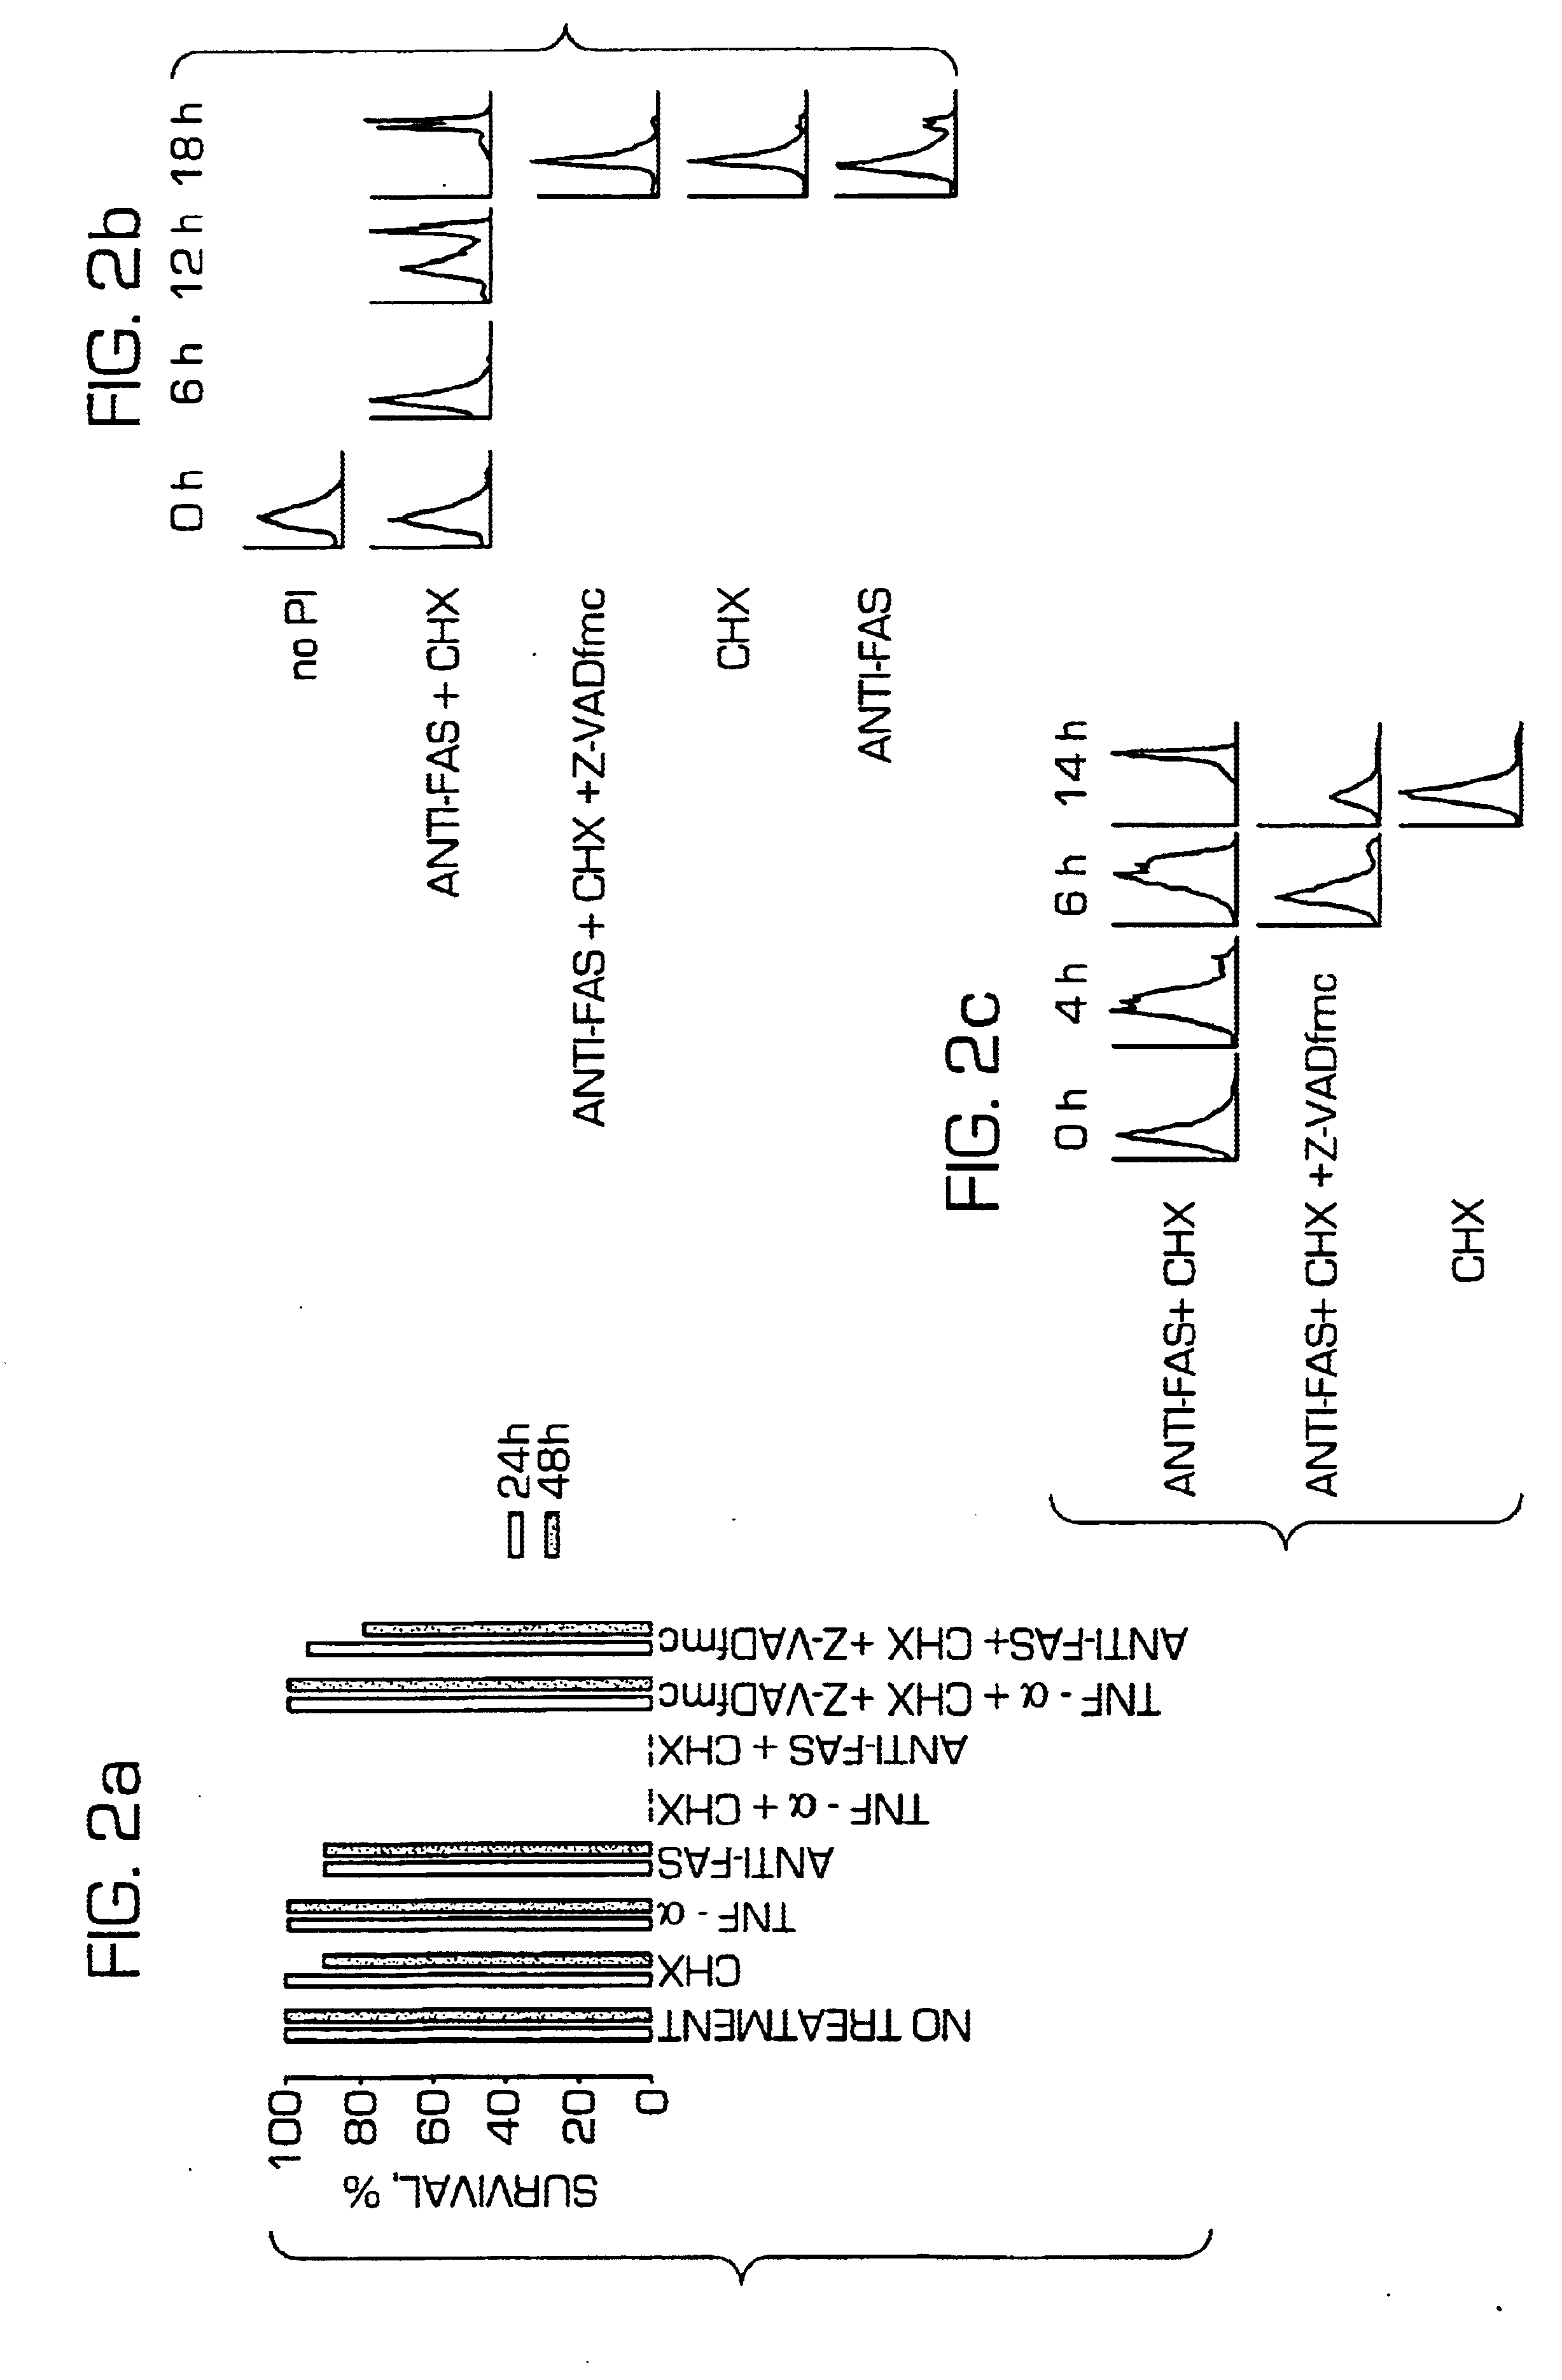 Compounds, methods of screening, and in vitro and in vivo uses involving anti-apoptotic genes and anti-apoptotic gene products